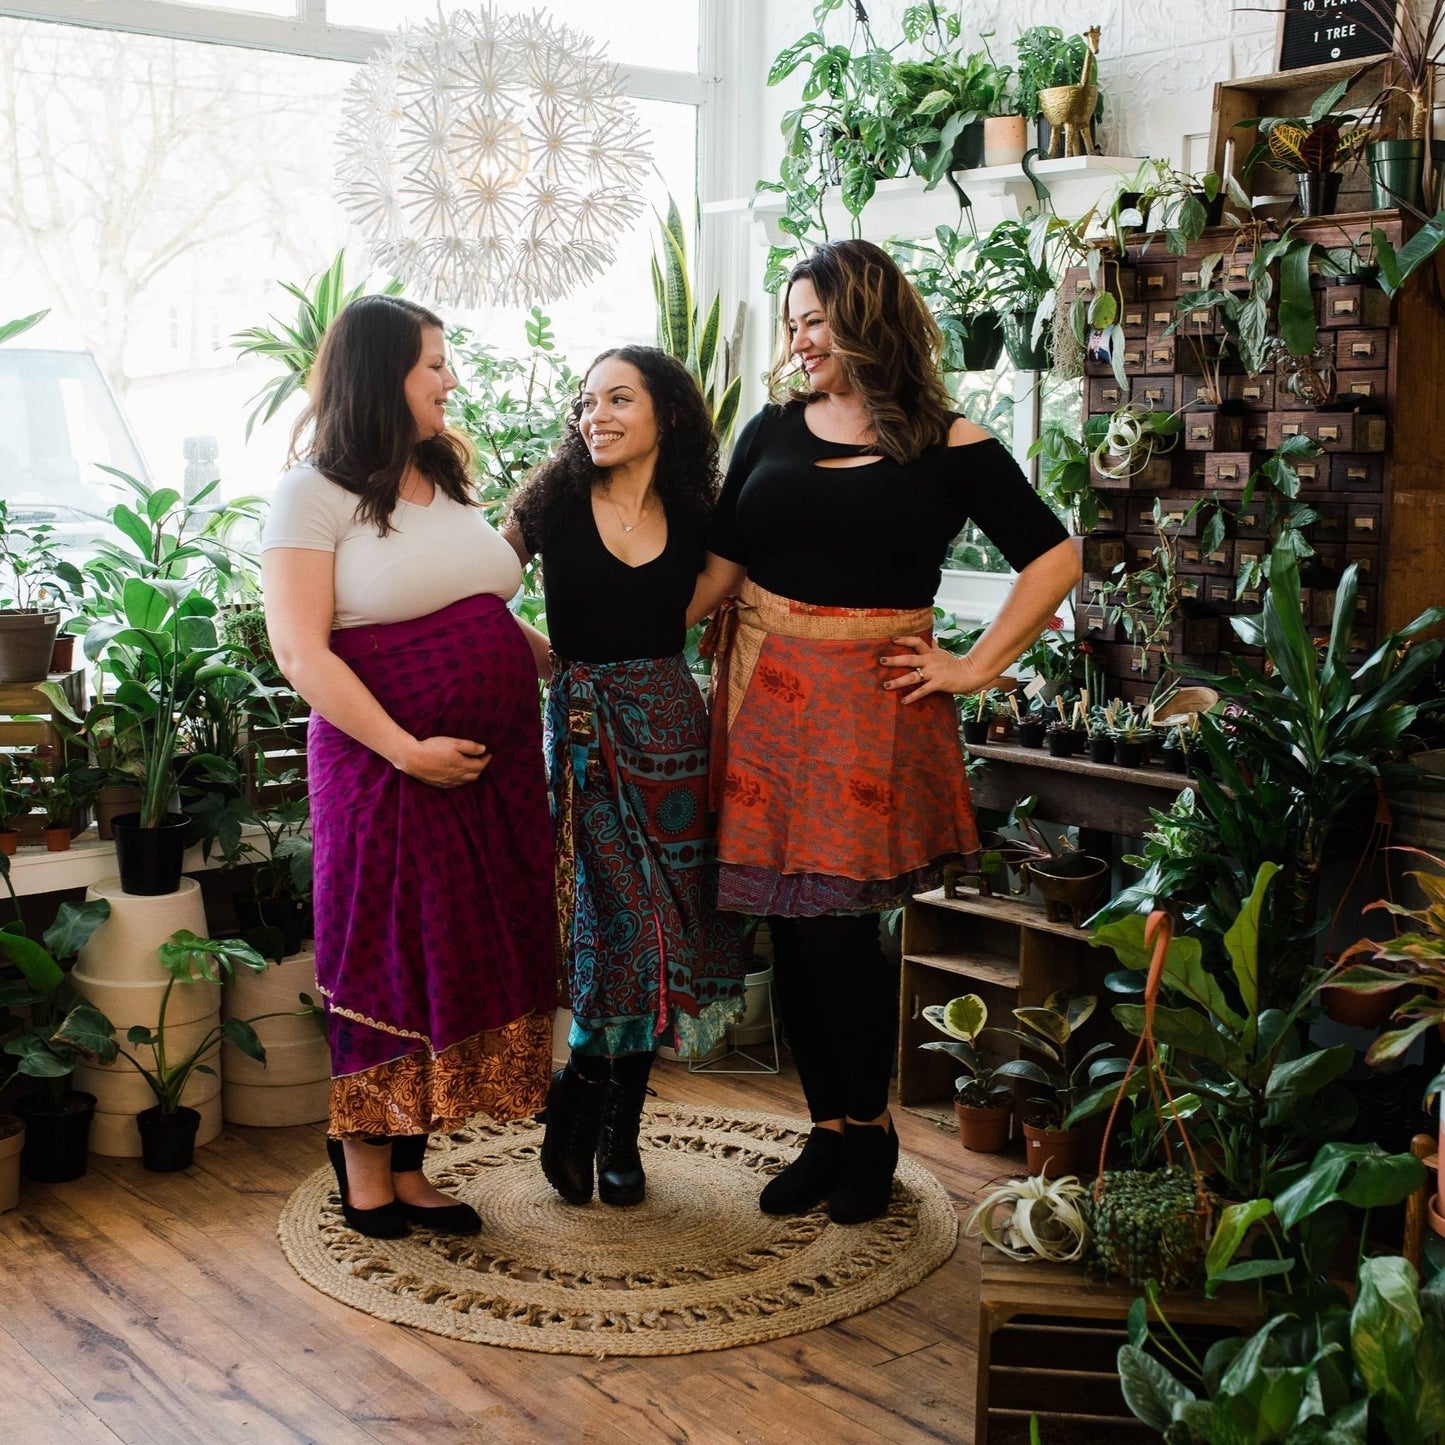 Three models wearing sari wrap skirts while standing in front of assorted potted plants.